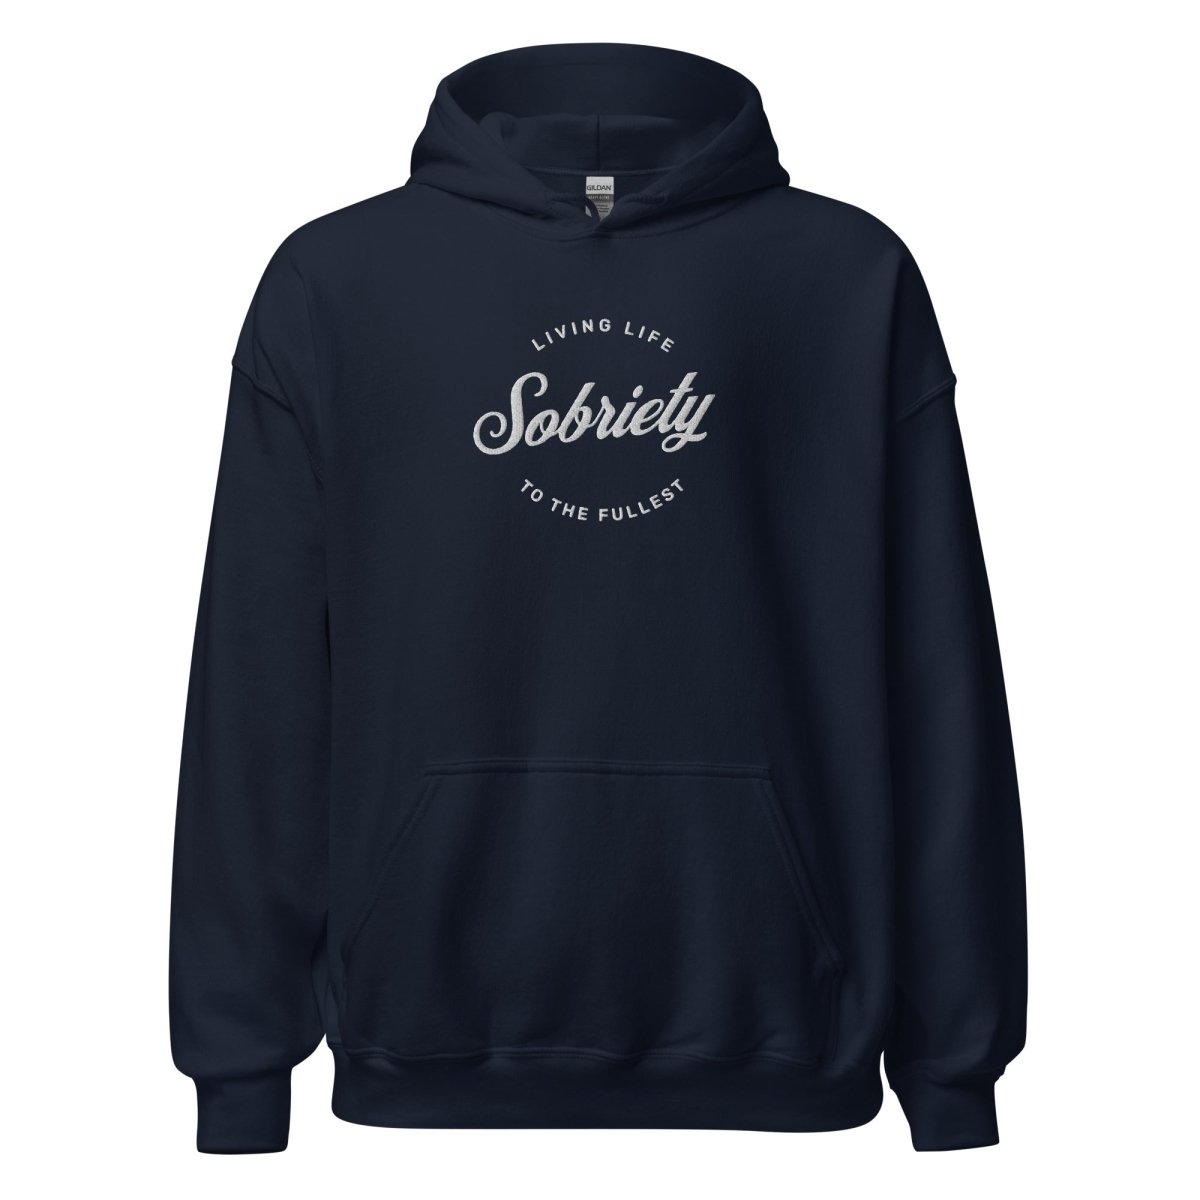 Sobriety, Living Lift To The Fullest - Embroidered Unisex Hoodie - Sobervation